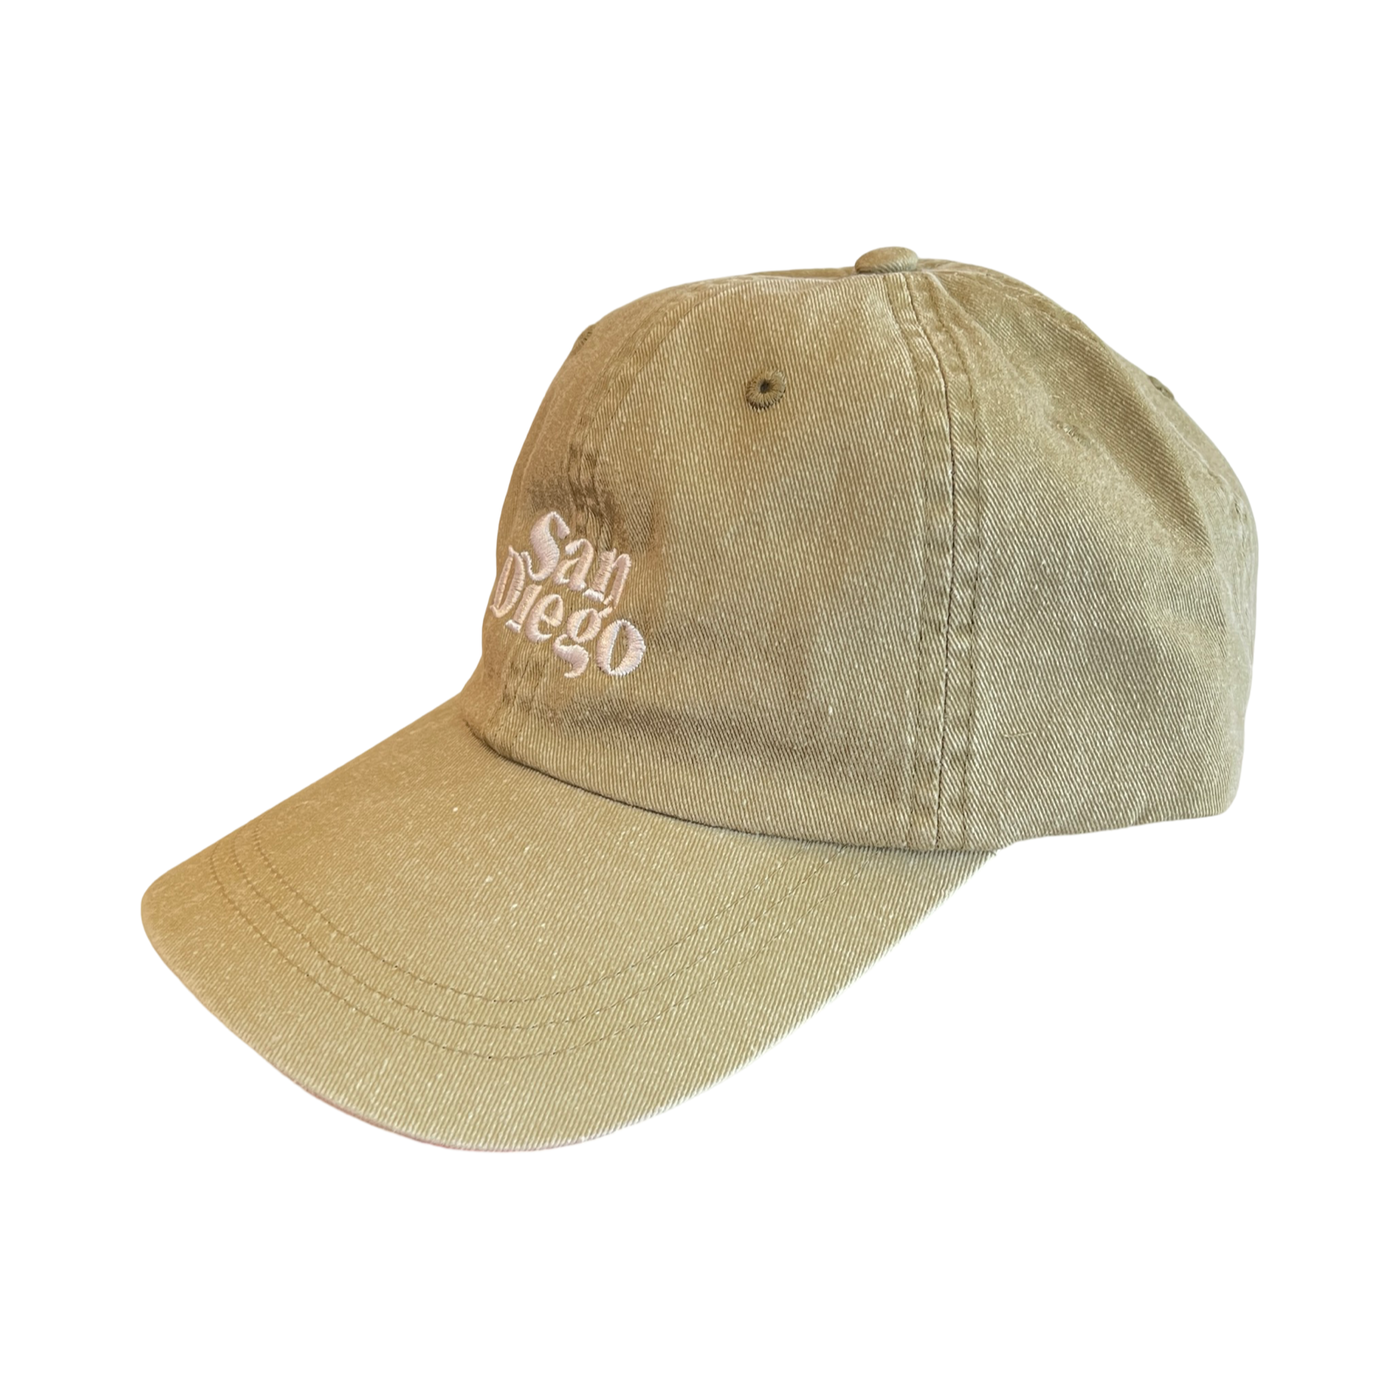 side view of a Khaki hat with the word San Diego in white lettering